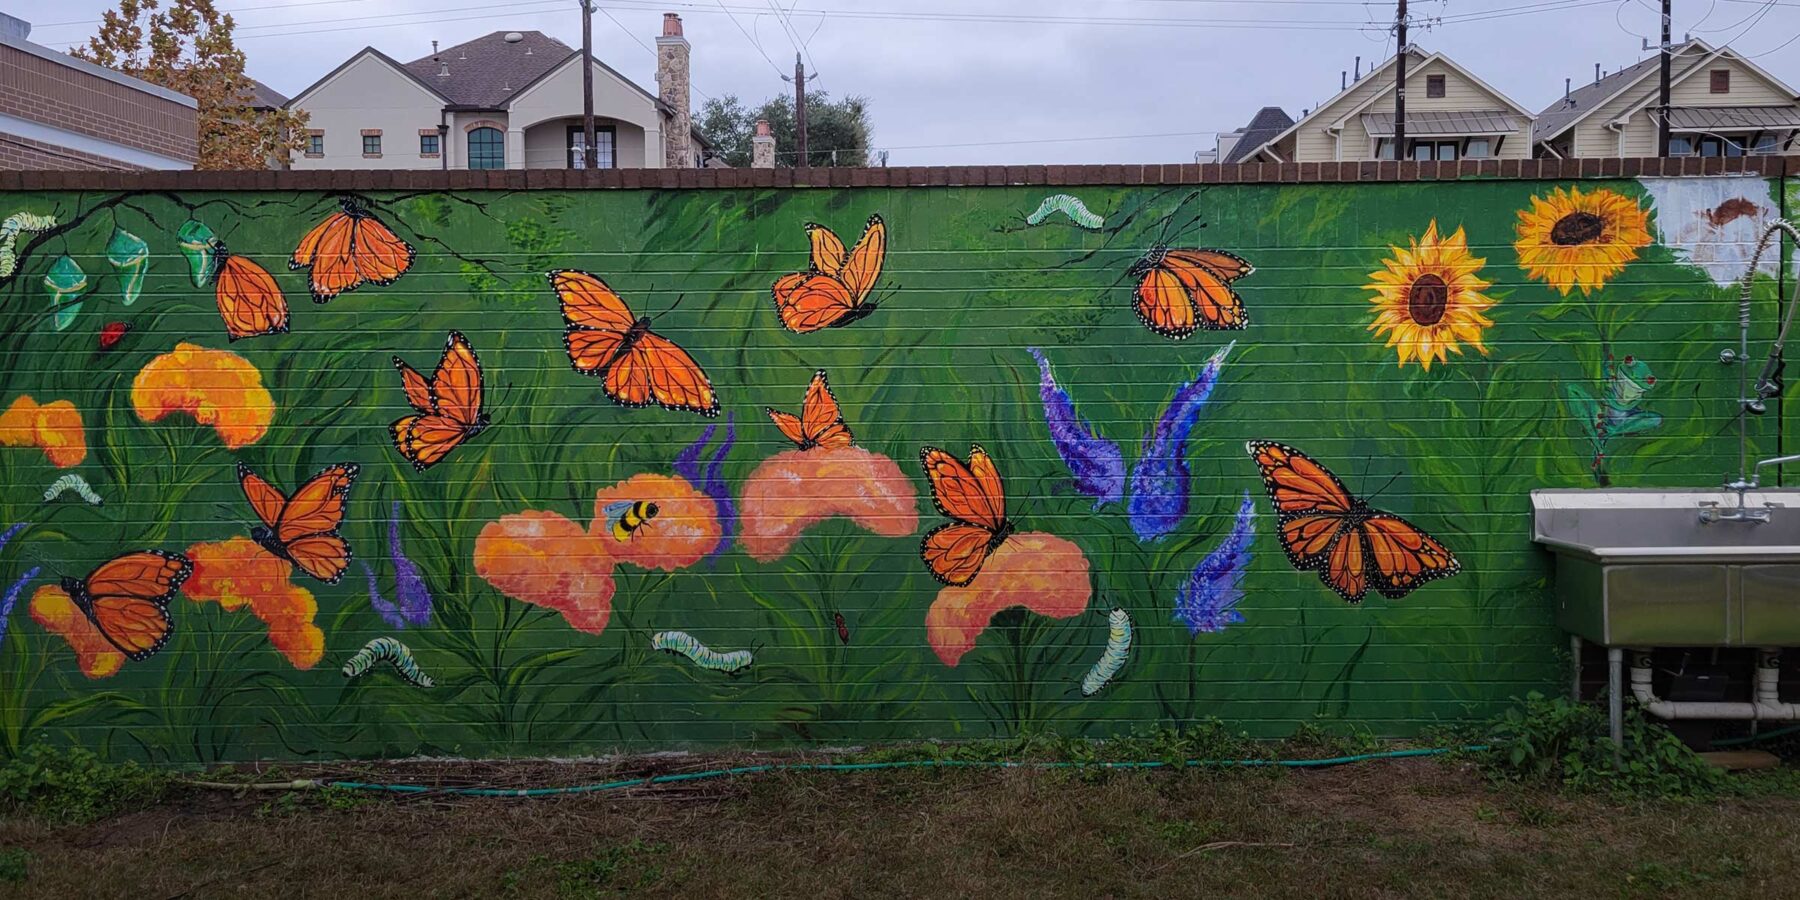 Baker Mural showing orange butterflies and flowers on a green background.